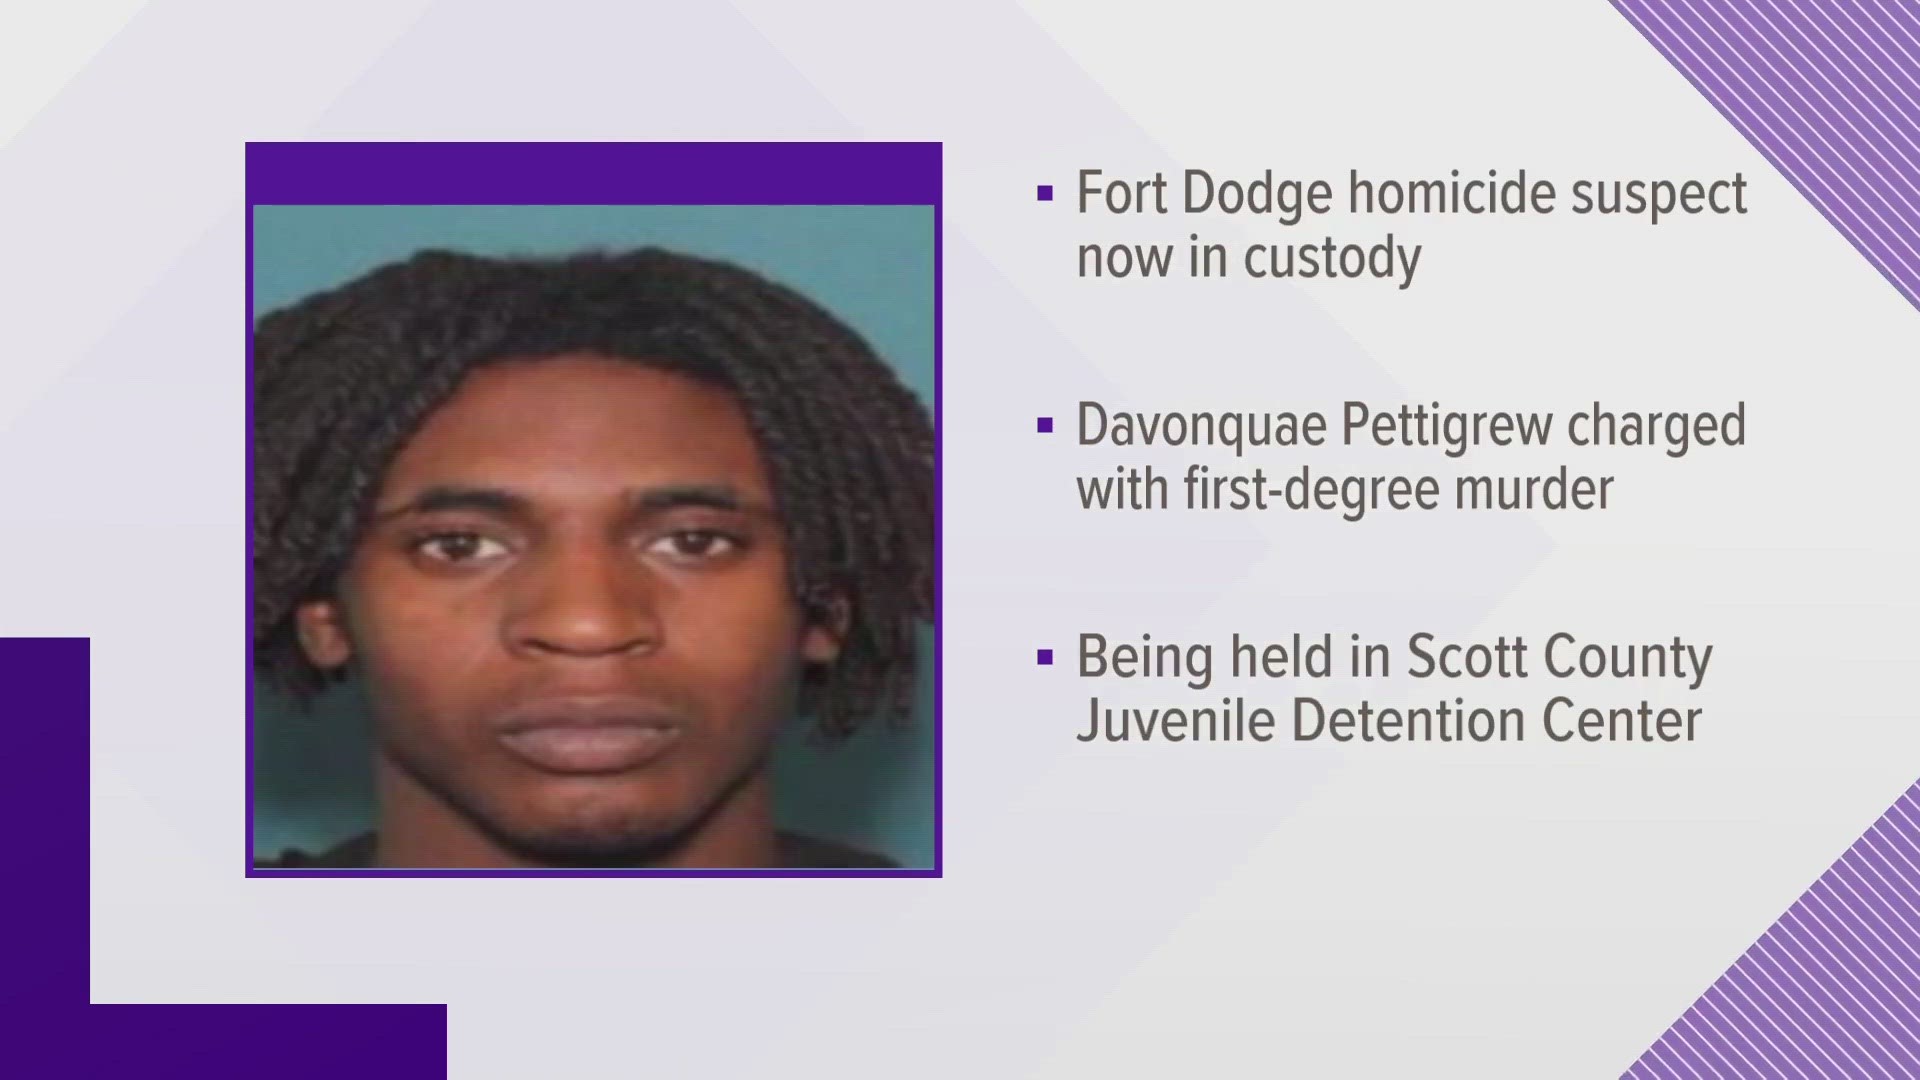 17-year-old Davonquae Pettigrew is charged with first-degree murder in the death of Patrick Walker.